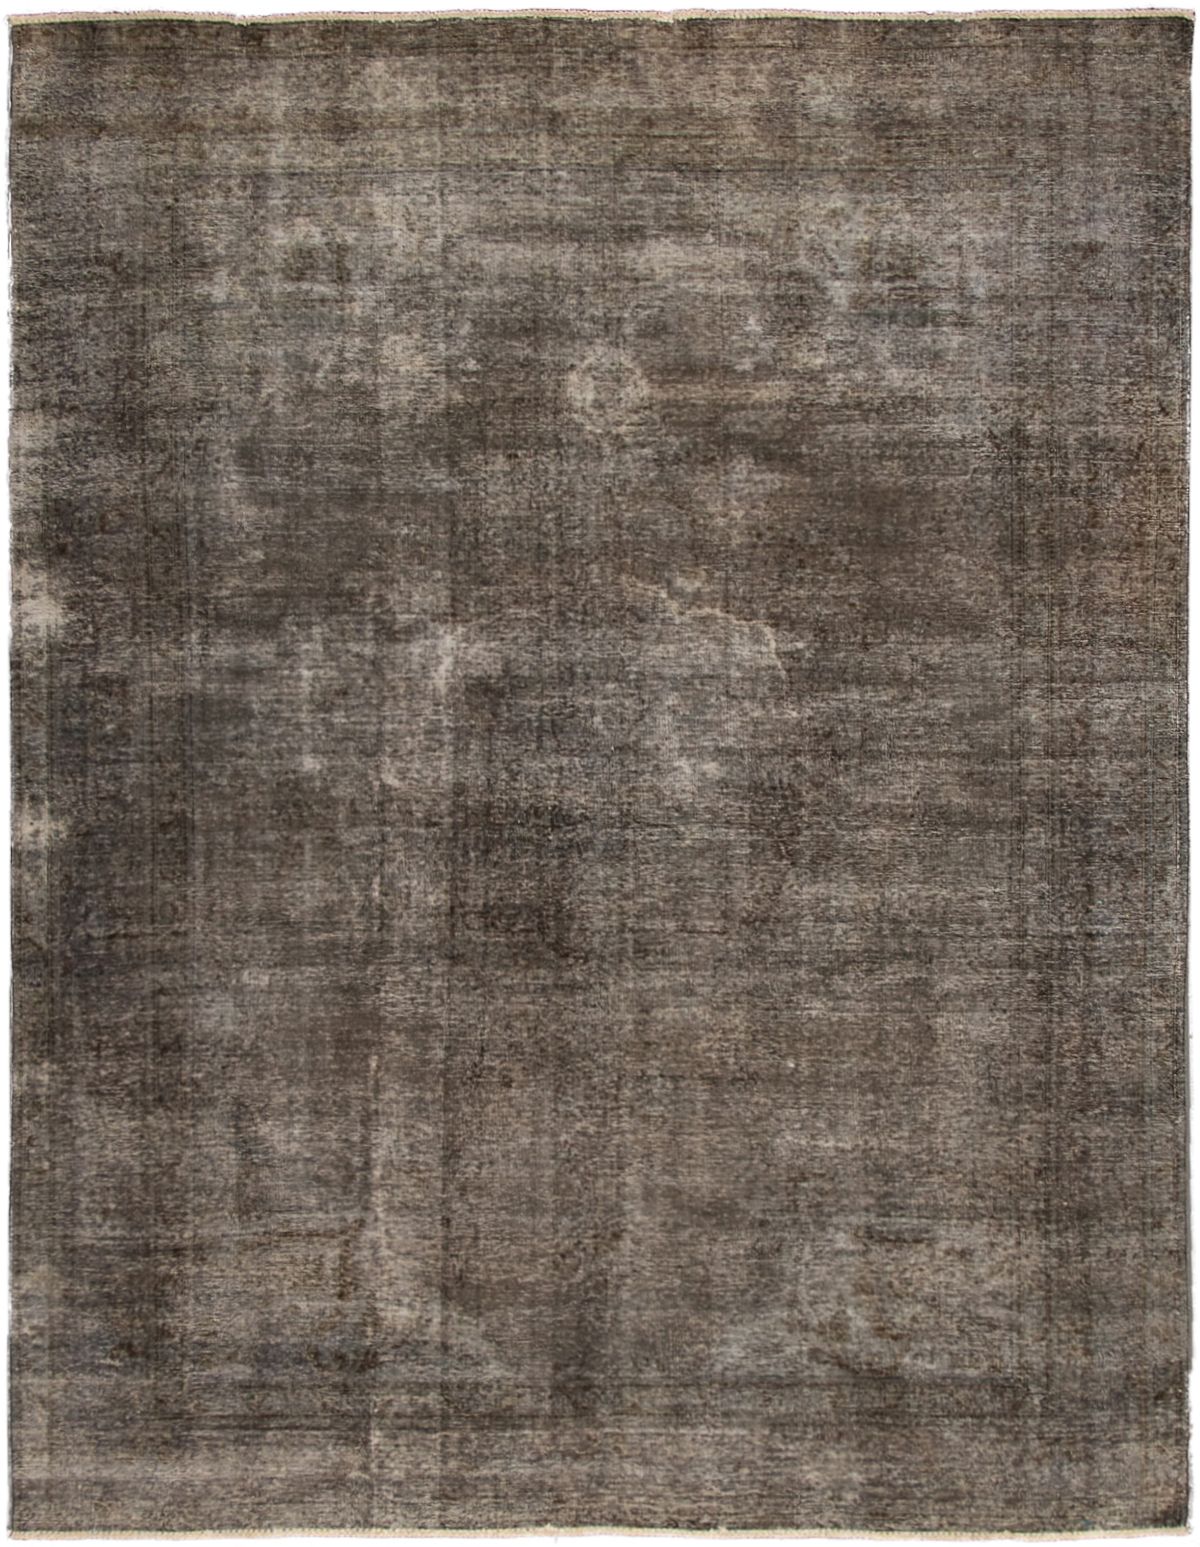 Hand-knotted Color Transition Dark Grey Wool Rug 9'10" x 12'9" Size: 9'10" x 12'9"  